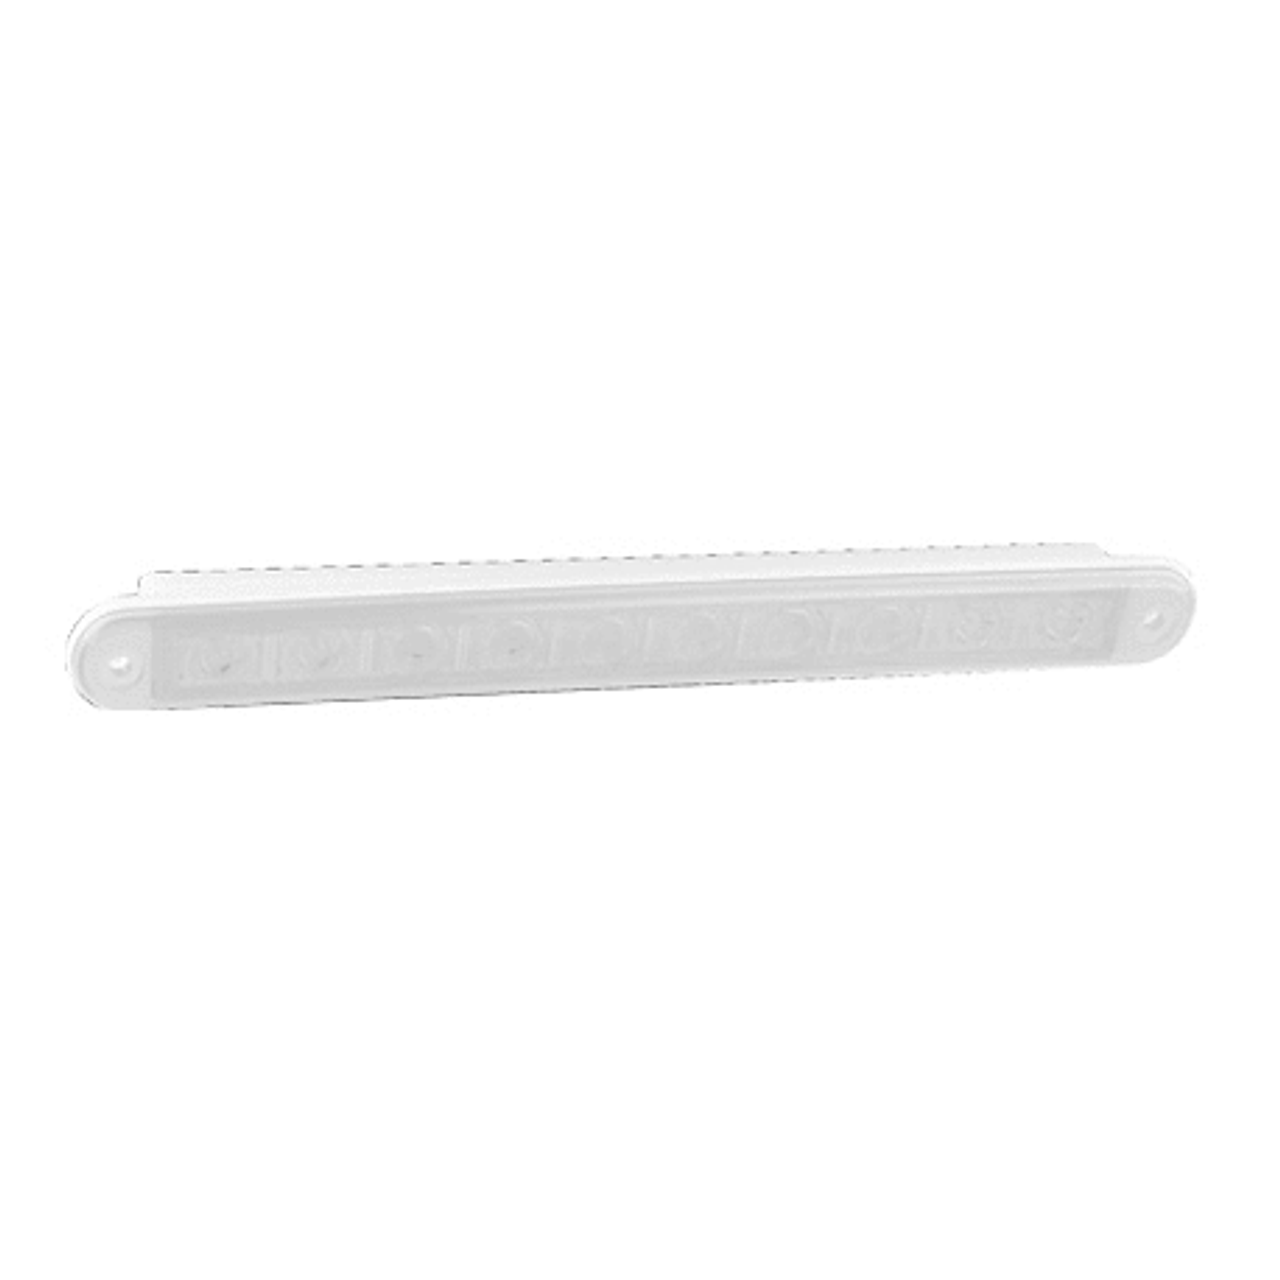 235CSEQ-2 - Sequential Indicator. Slimline Low Profile Light. Recessed Fitting. Includes Grommet. Clear Lens. Twin Pack. Autolamps. Ultimate LED. 